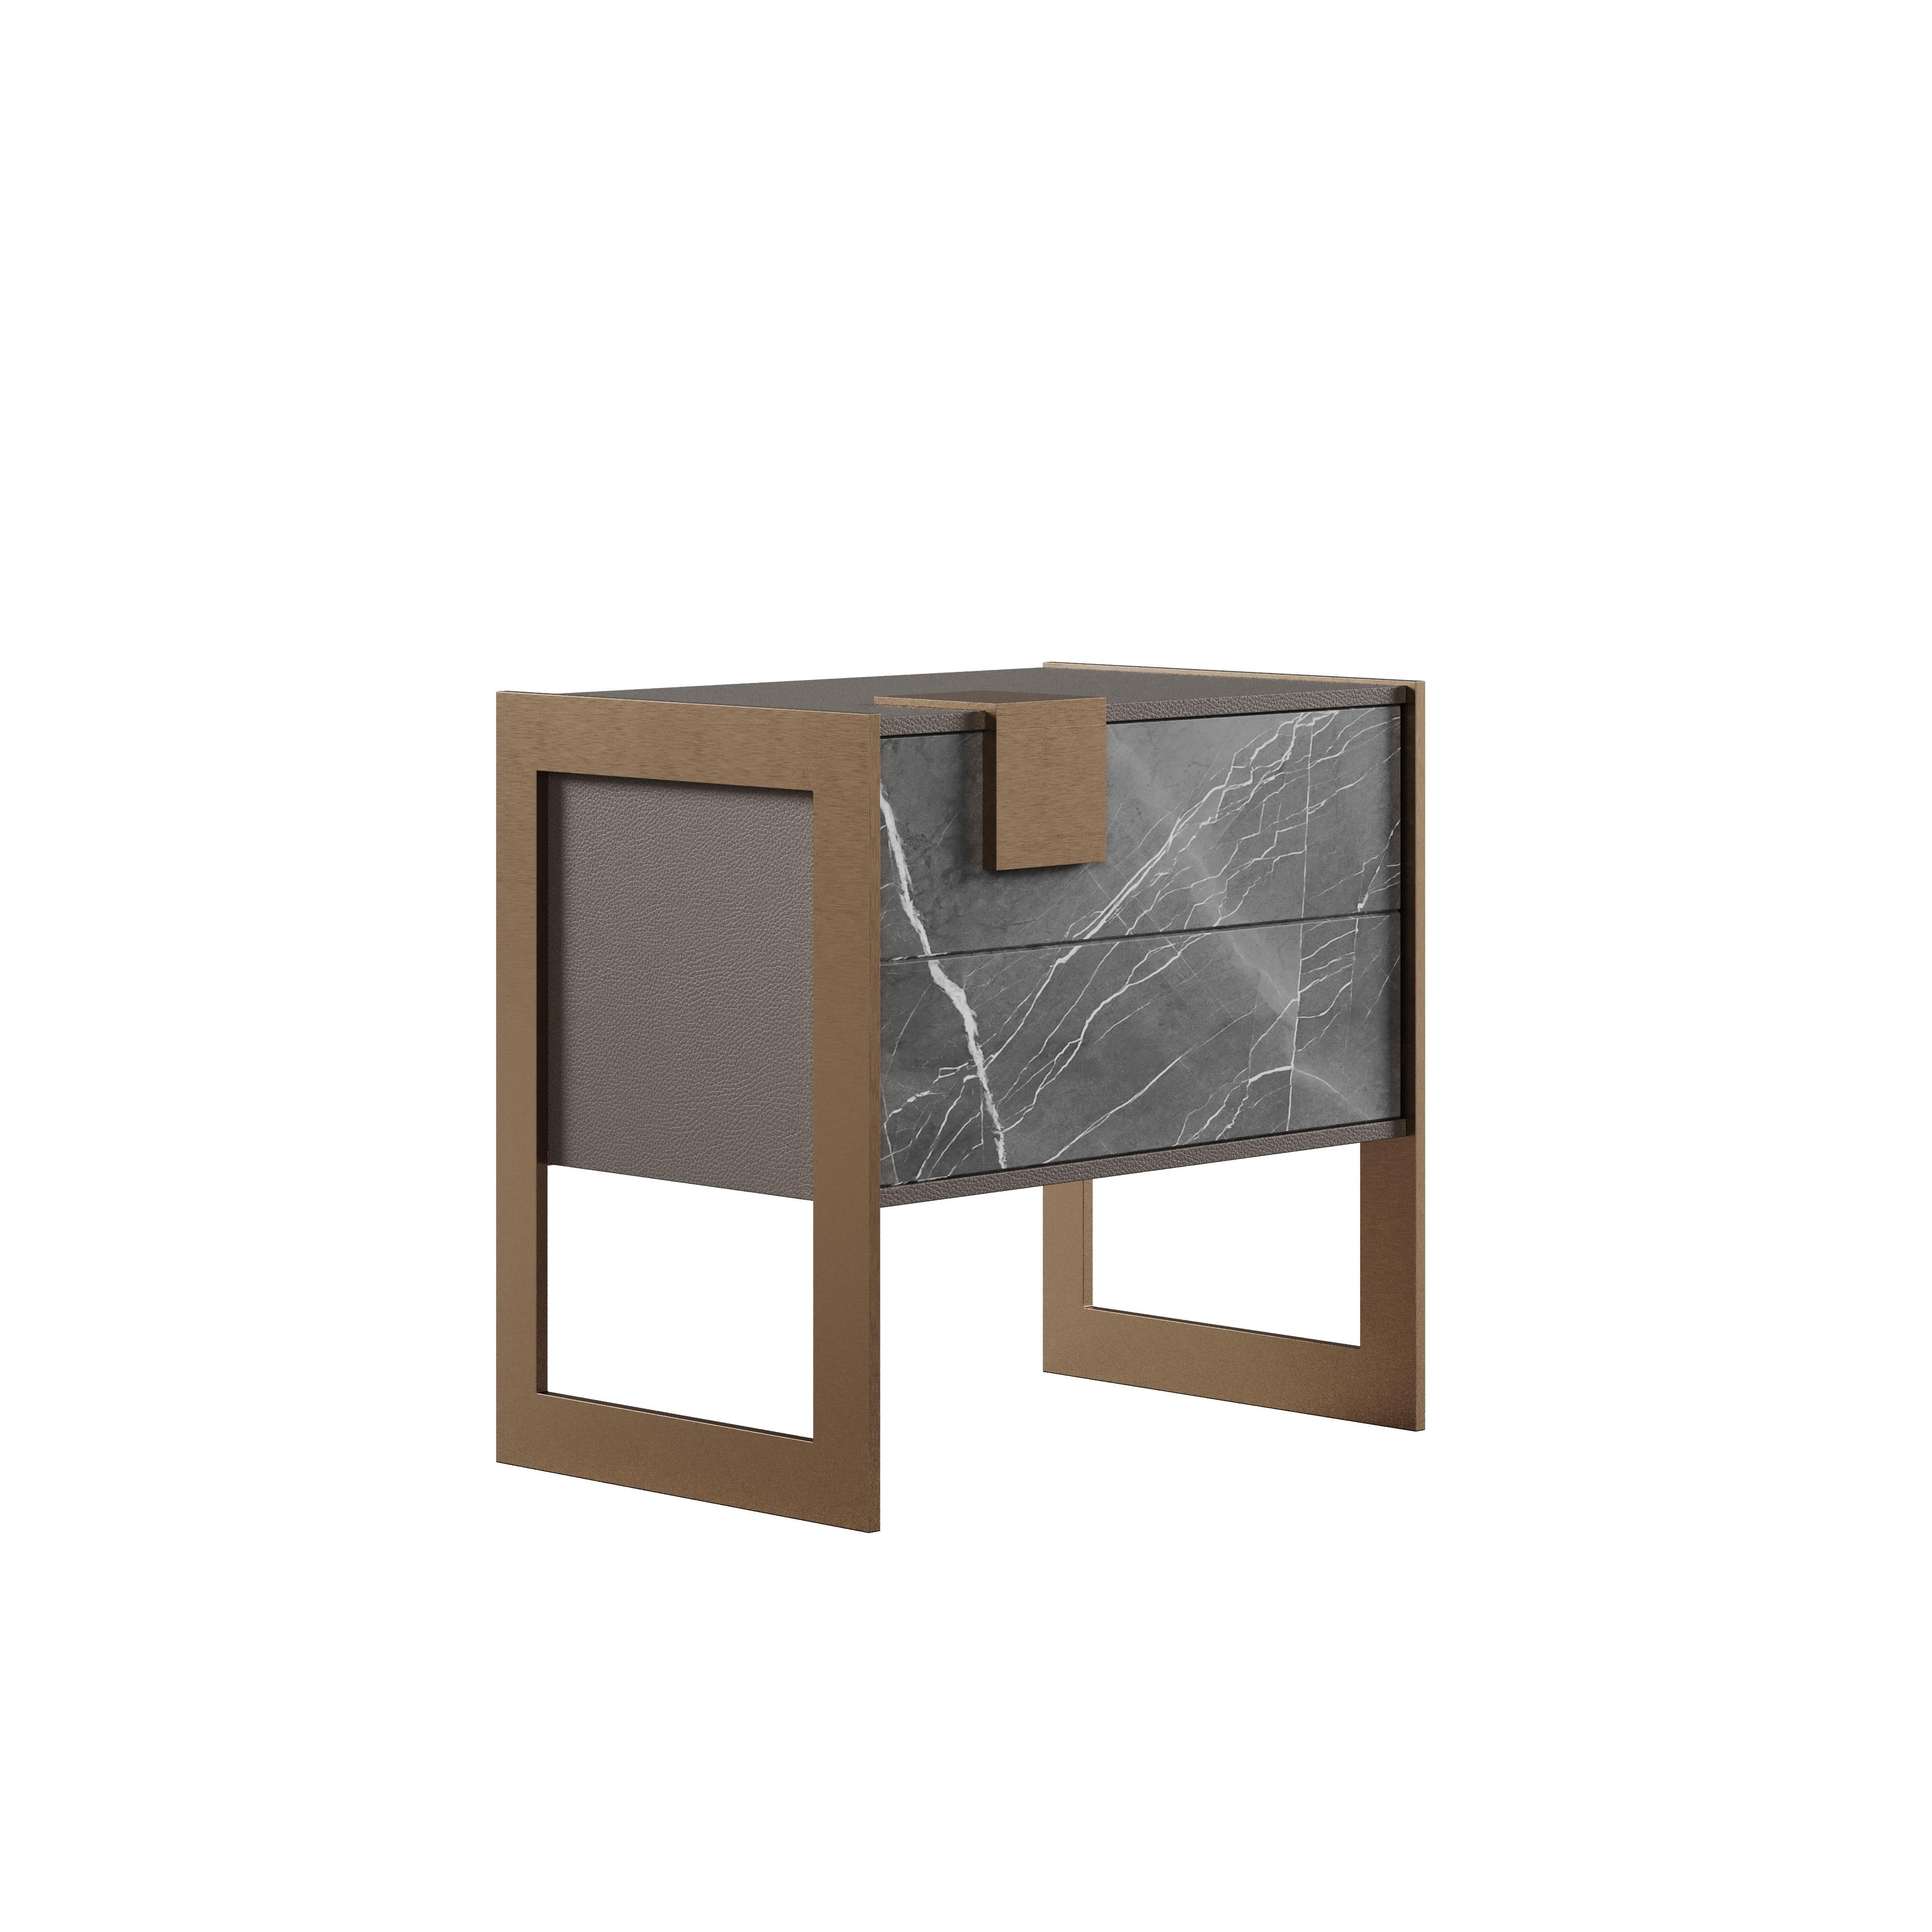 Portuguese 21st Century Coloma Bedside Table Grey kendzo Brass Wood For Sale